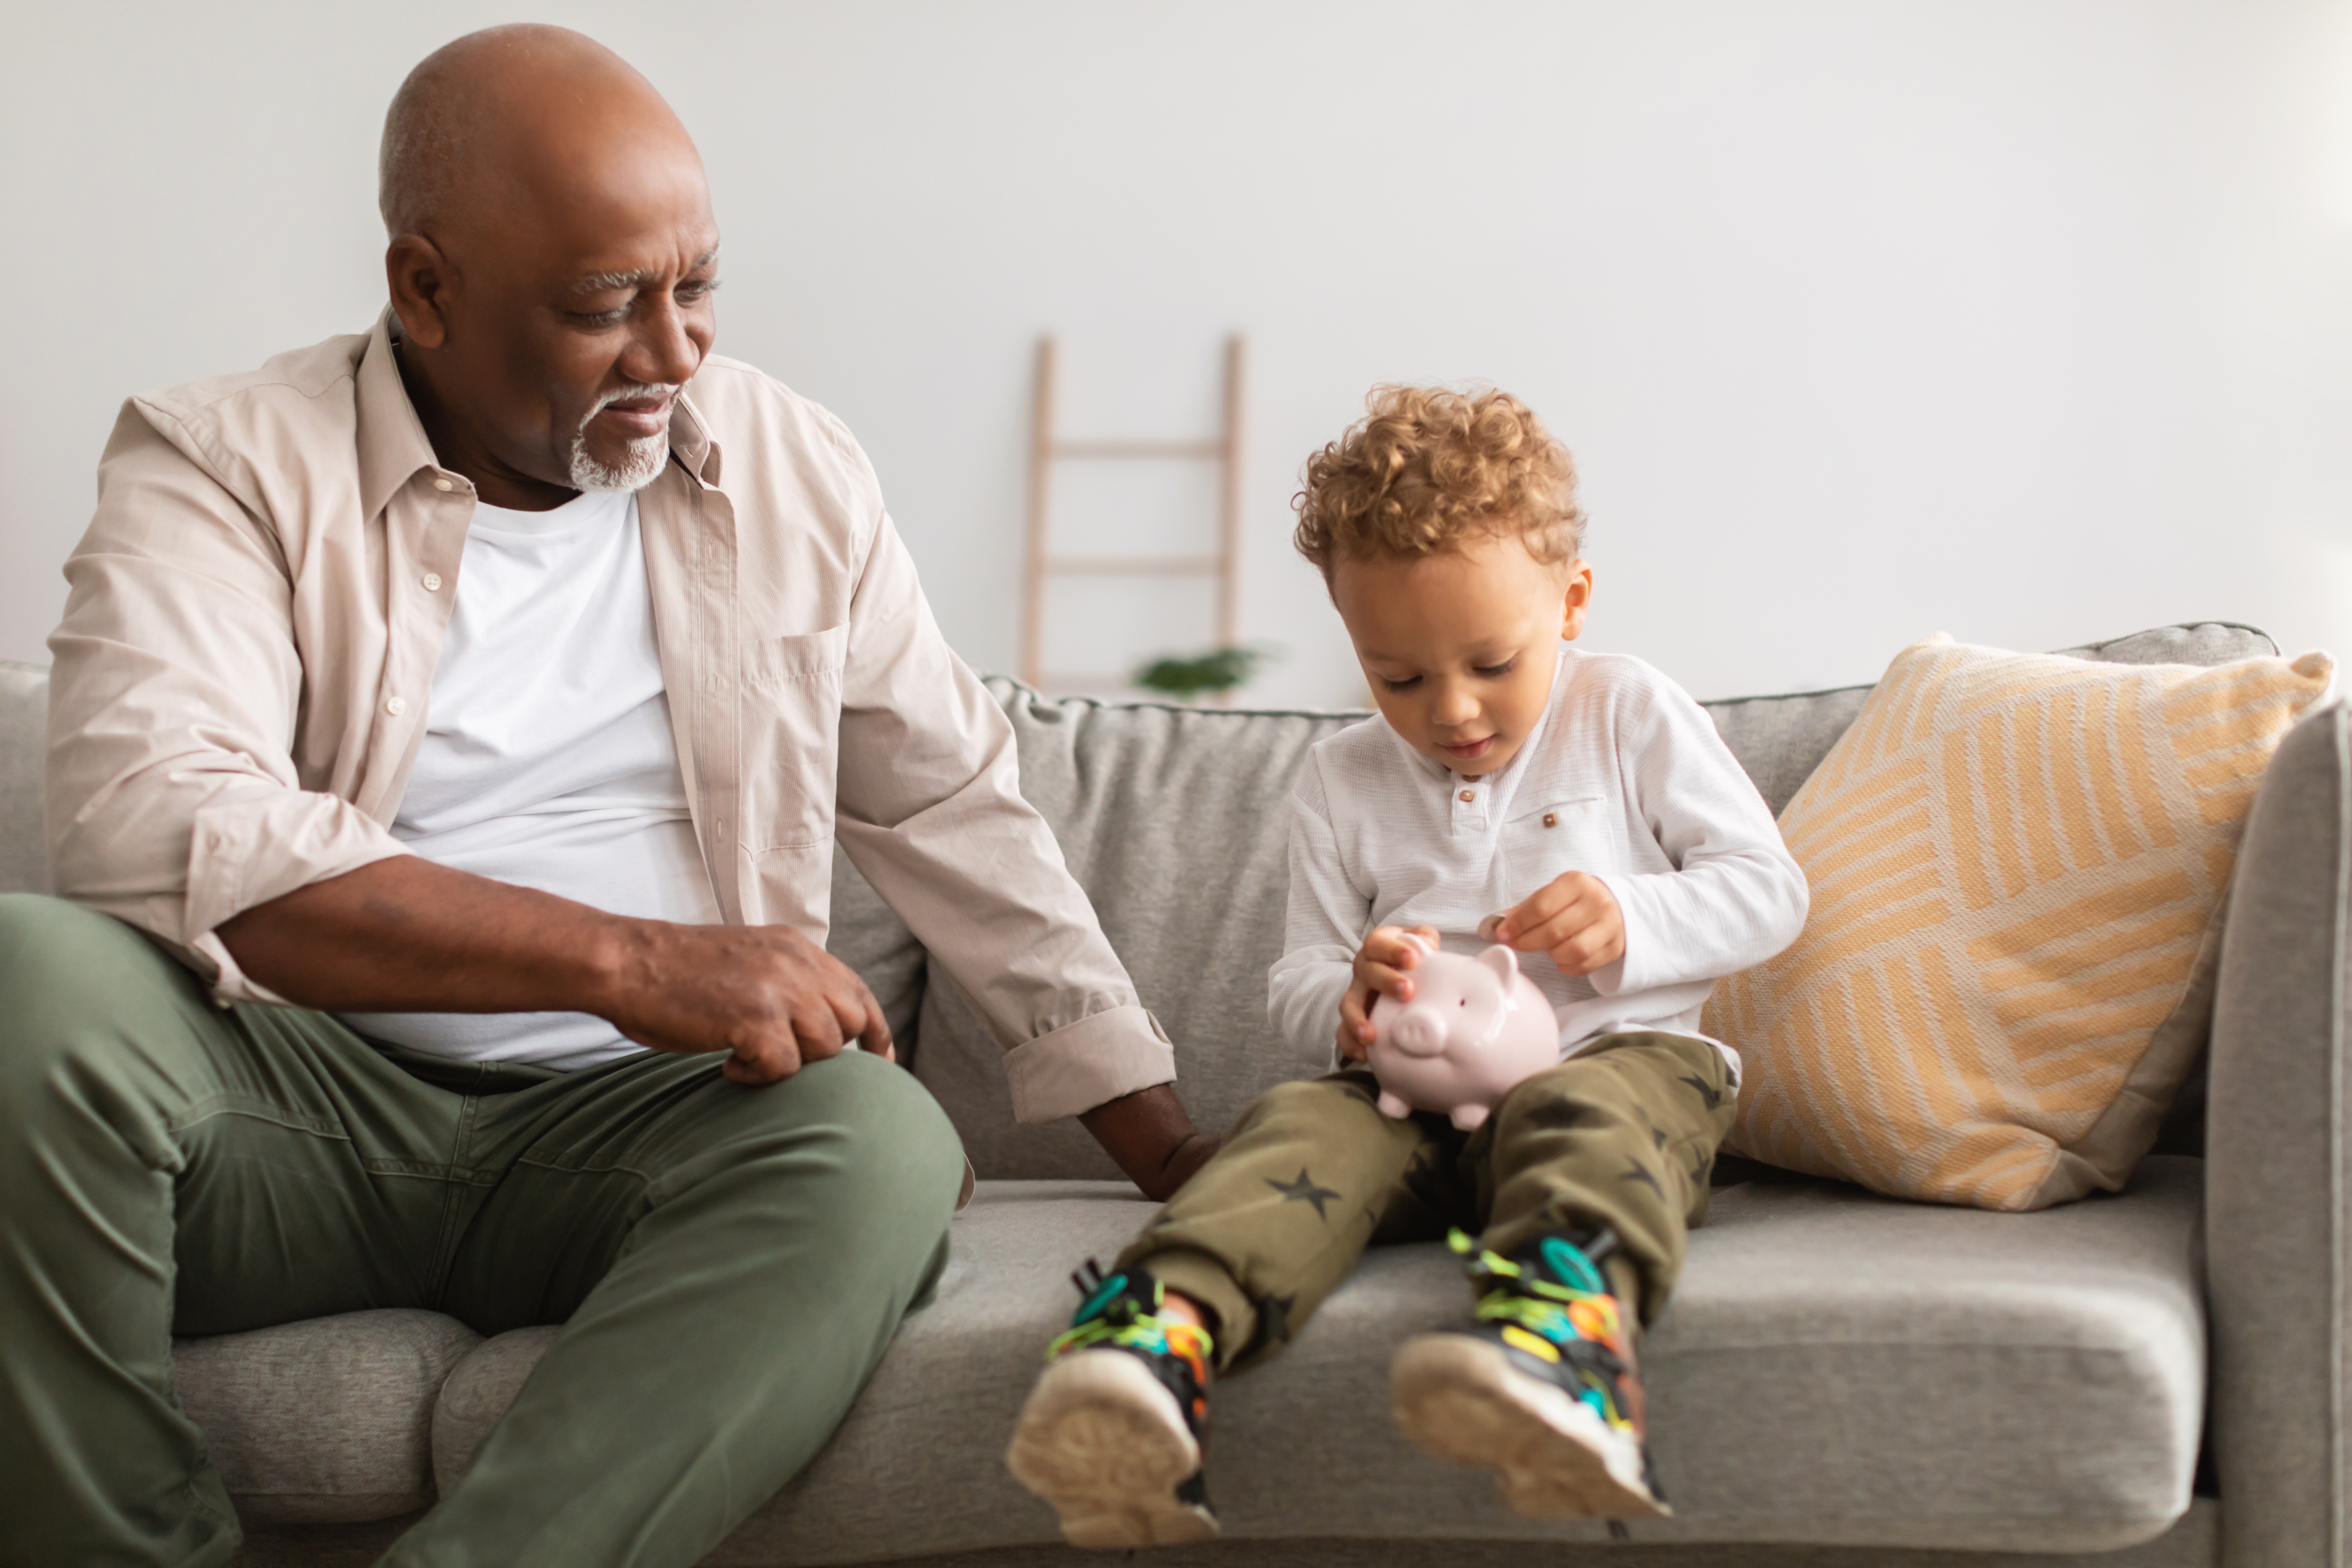 "From piggybank savings to secure futures: Grandpa and grandson ponder — is setting up a trust for the young one the next step?"